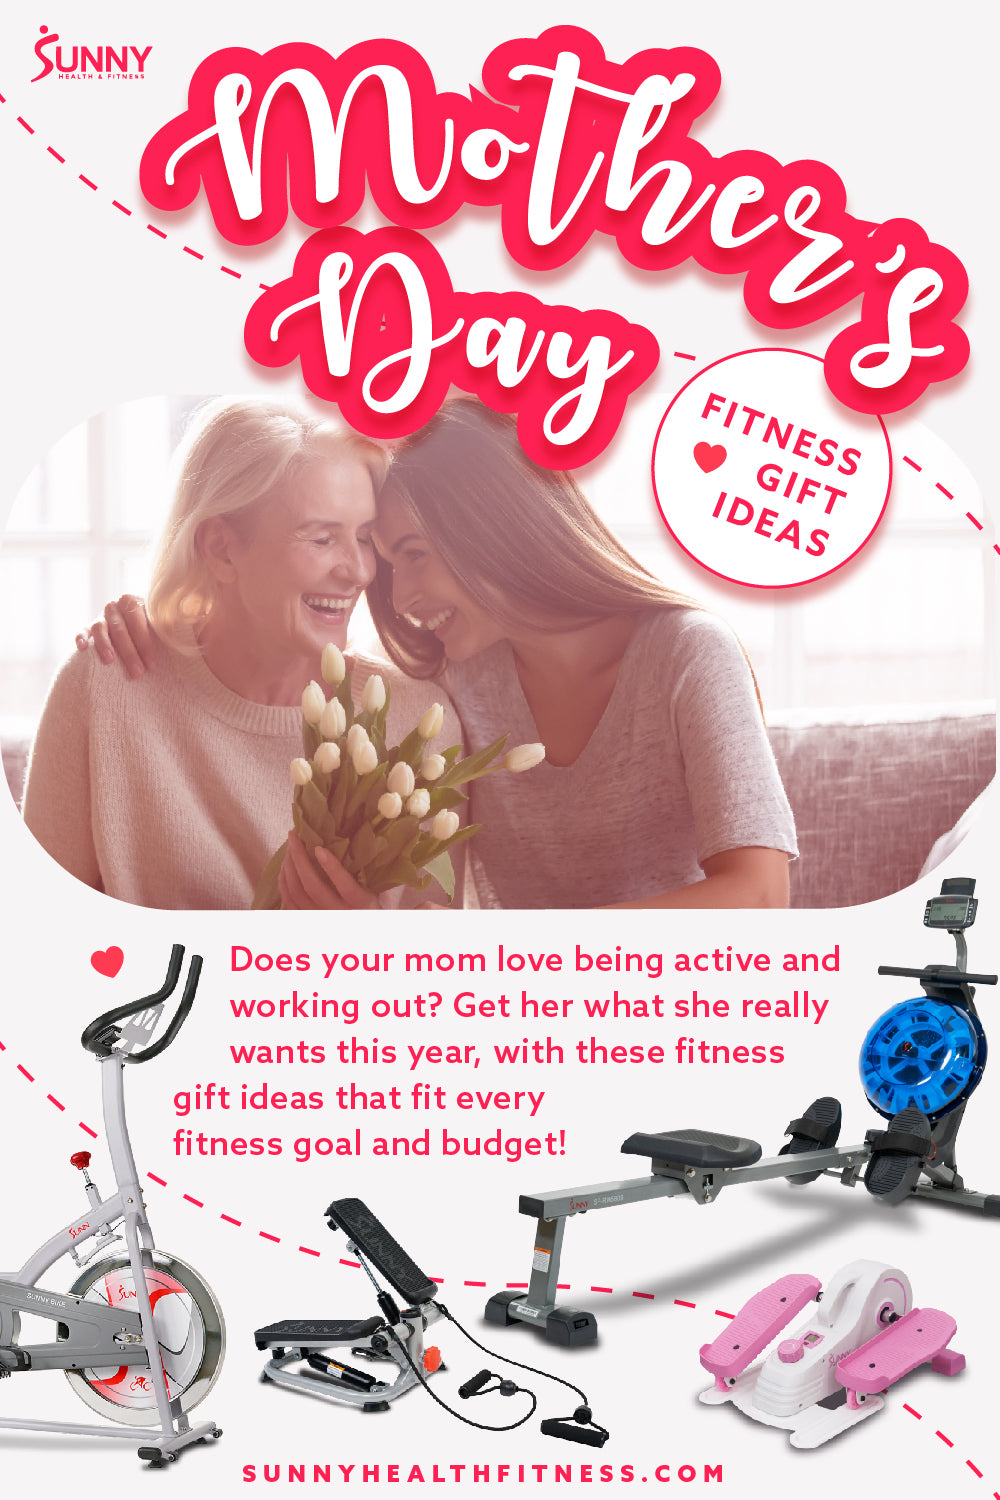 https://cdn.shopify.com/s/files/1/0052/7043/7978/t/90/assets/Sunny-Health-Fitness-2021-Mothers-Day-Workout-Gift-Ideas.jpg